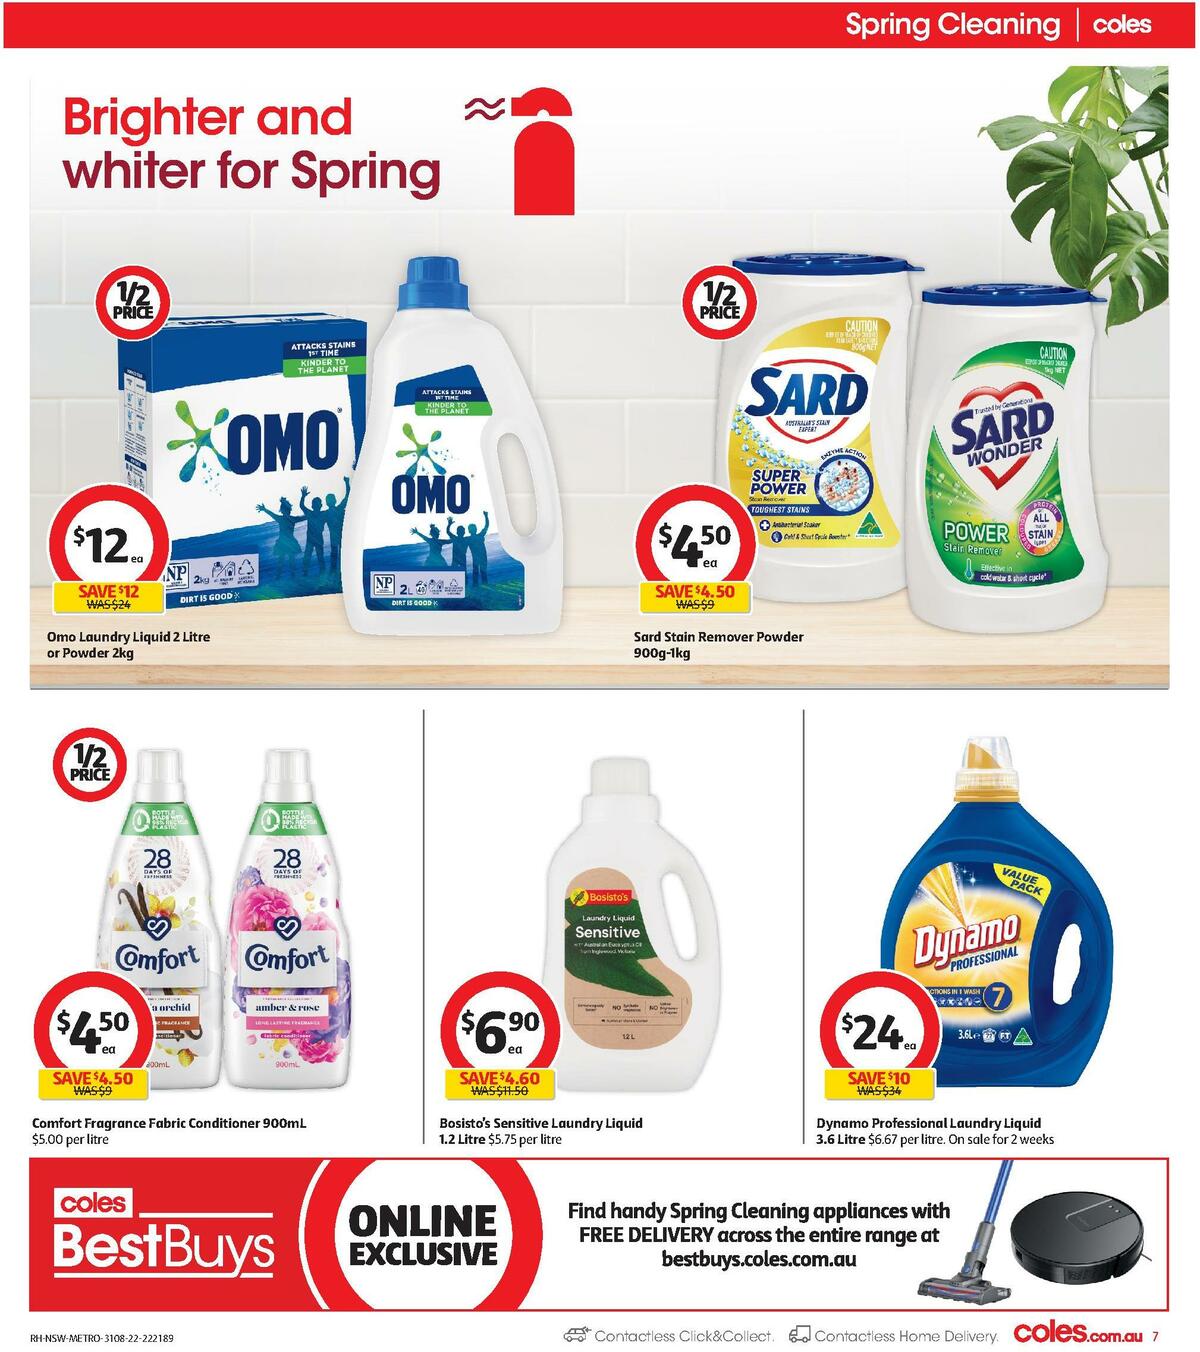 Coles Spring Cleaning Catalogues from 31 August